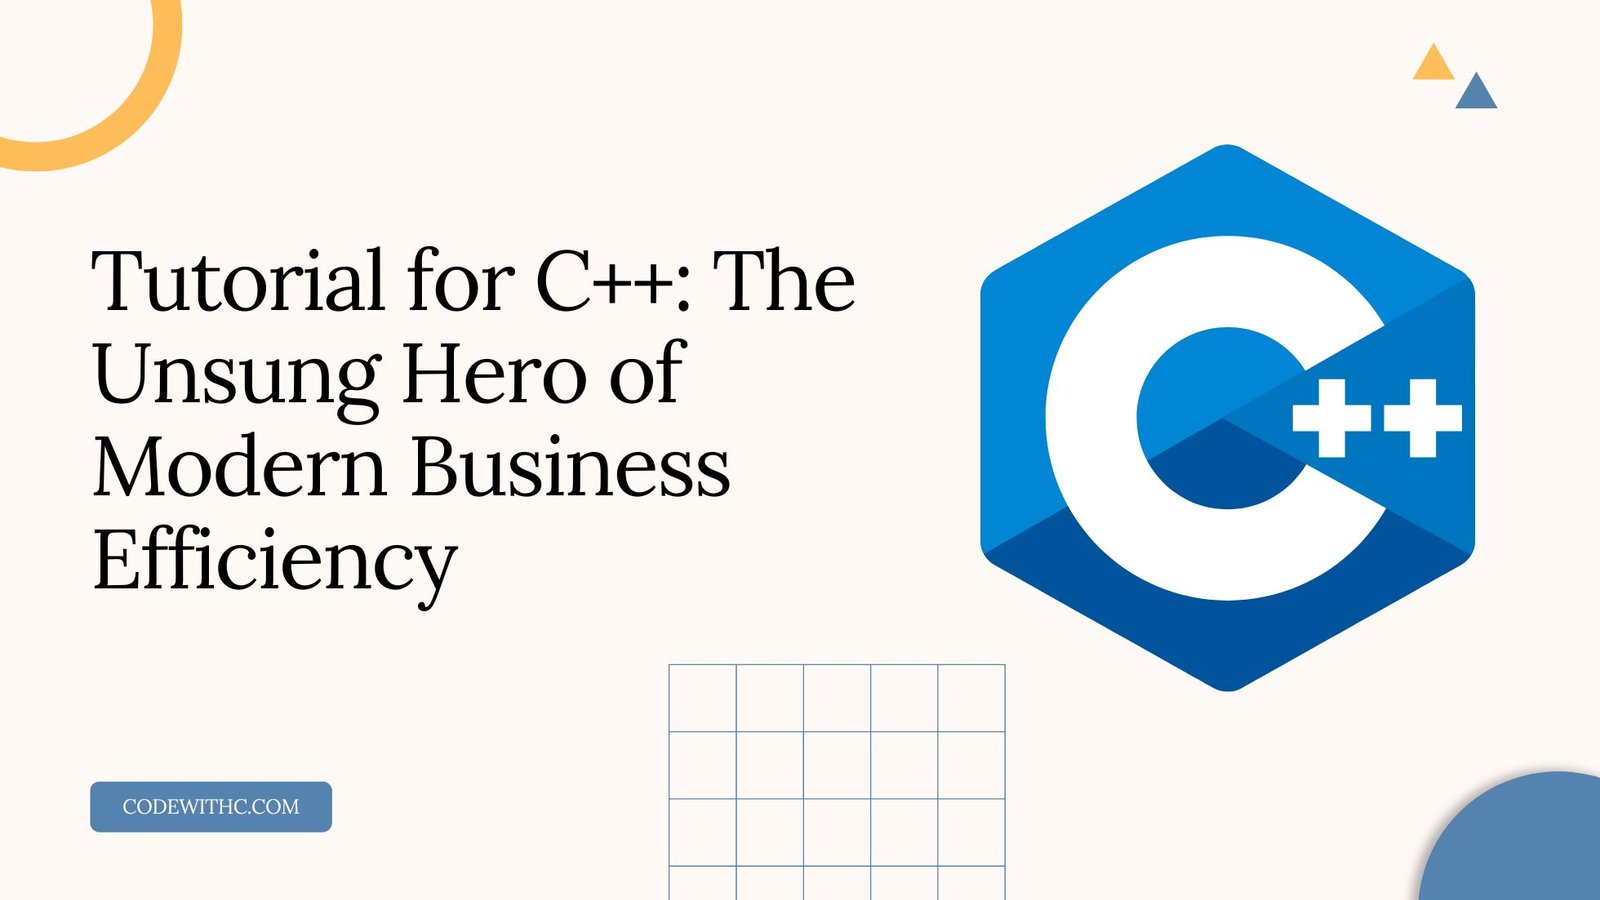 Tutorial for C++: The Unsung Hero of Modern Business Efficiency